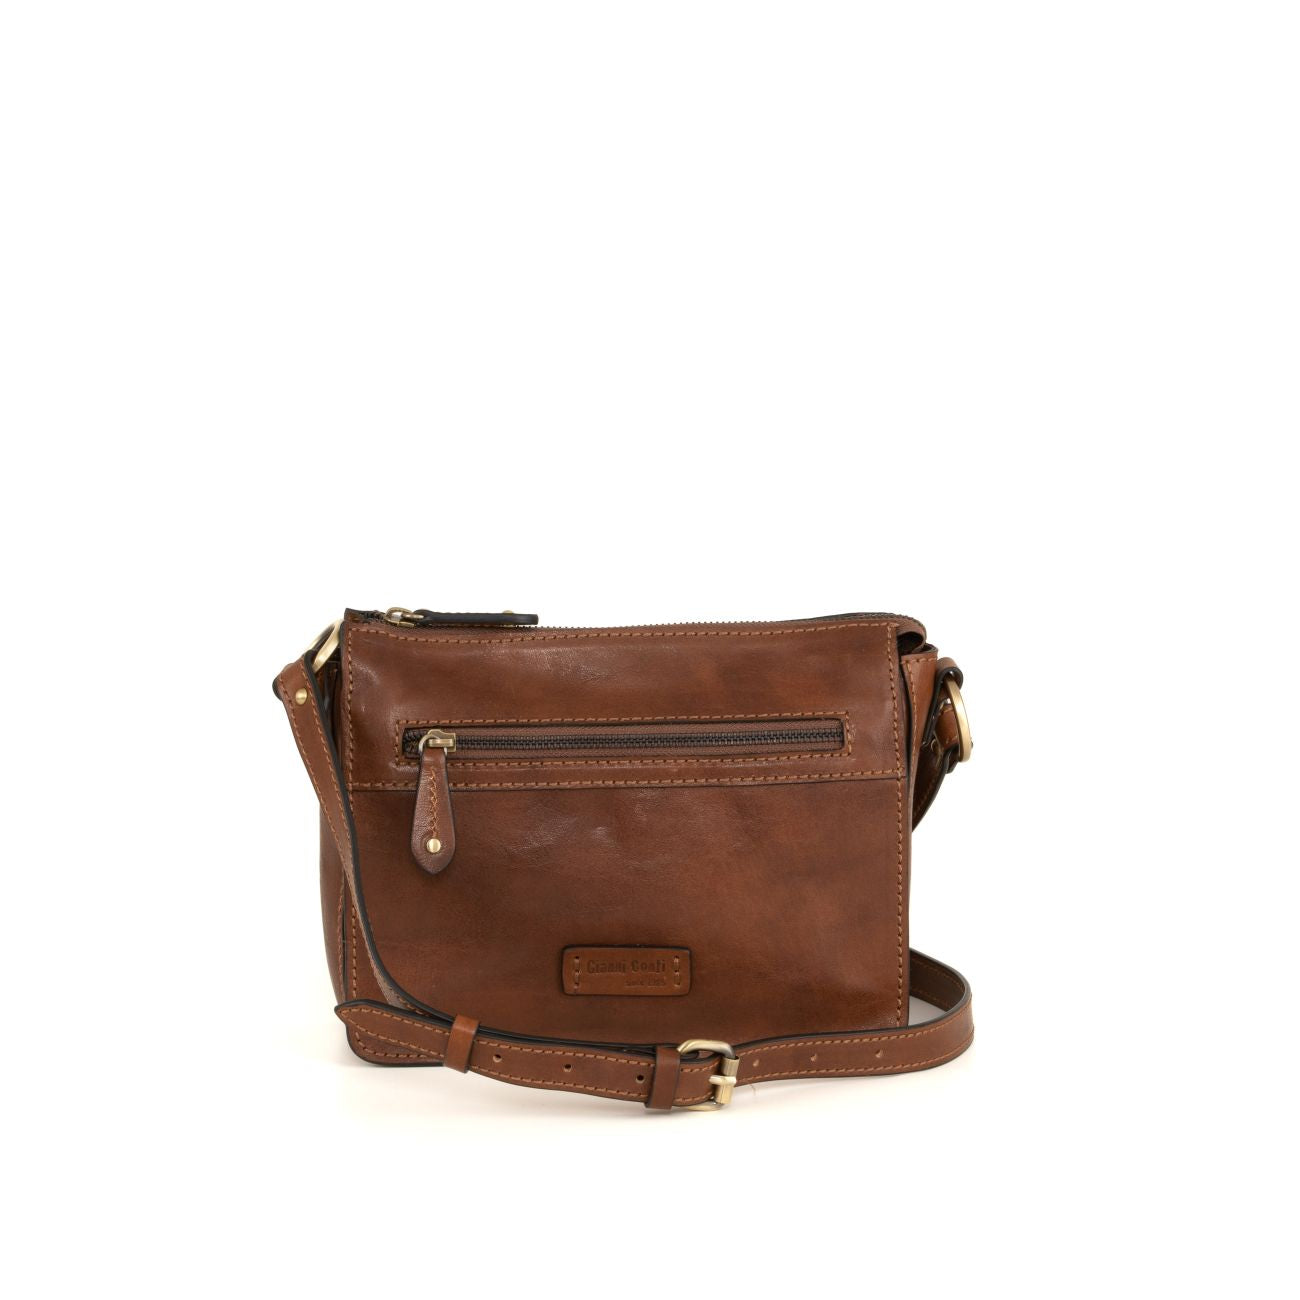 Brown leather crossbody handbag with front zip pocket and adjustable strap